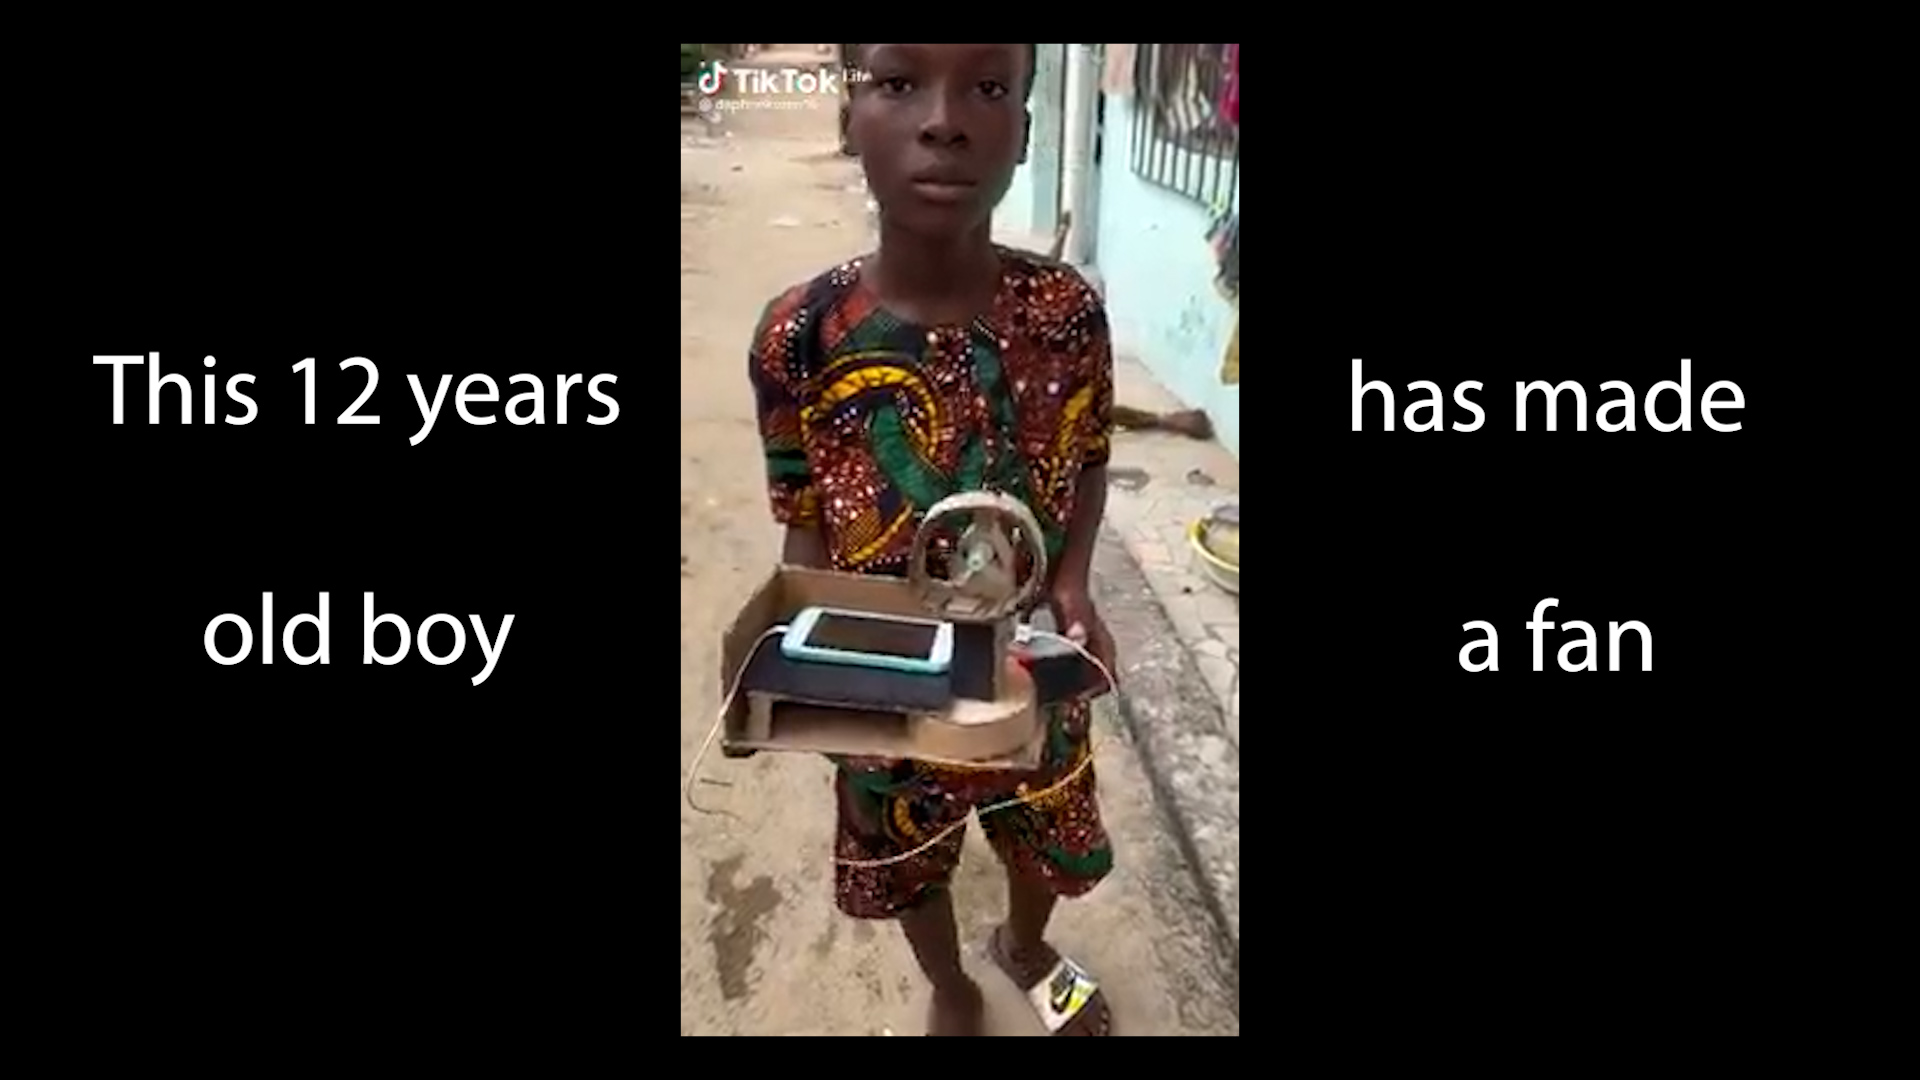 A 12 years old African inventor